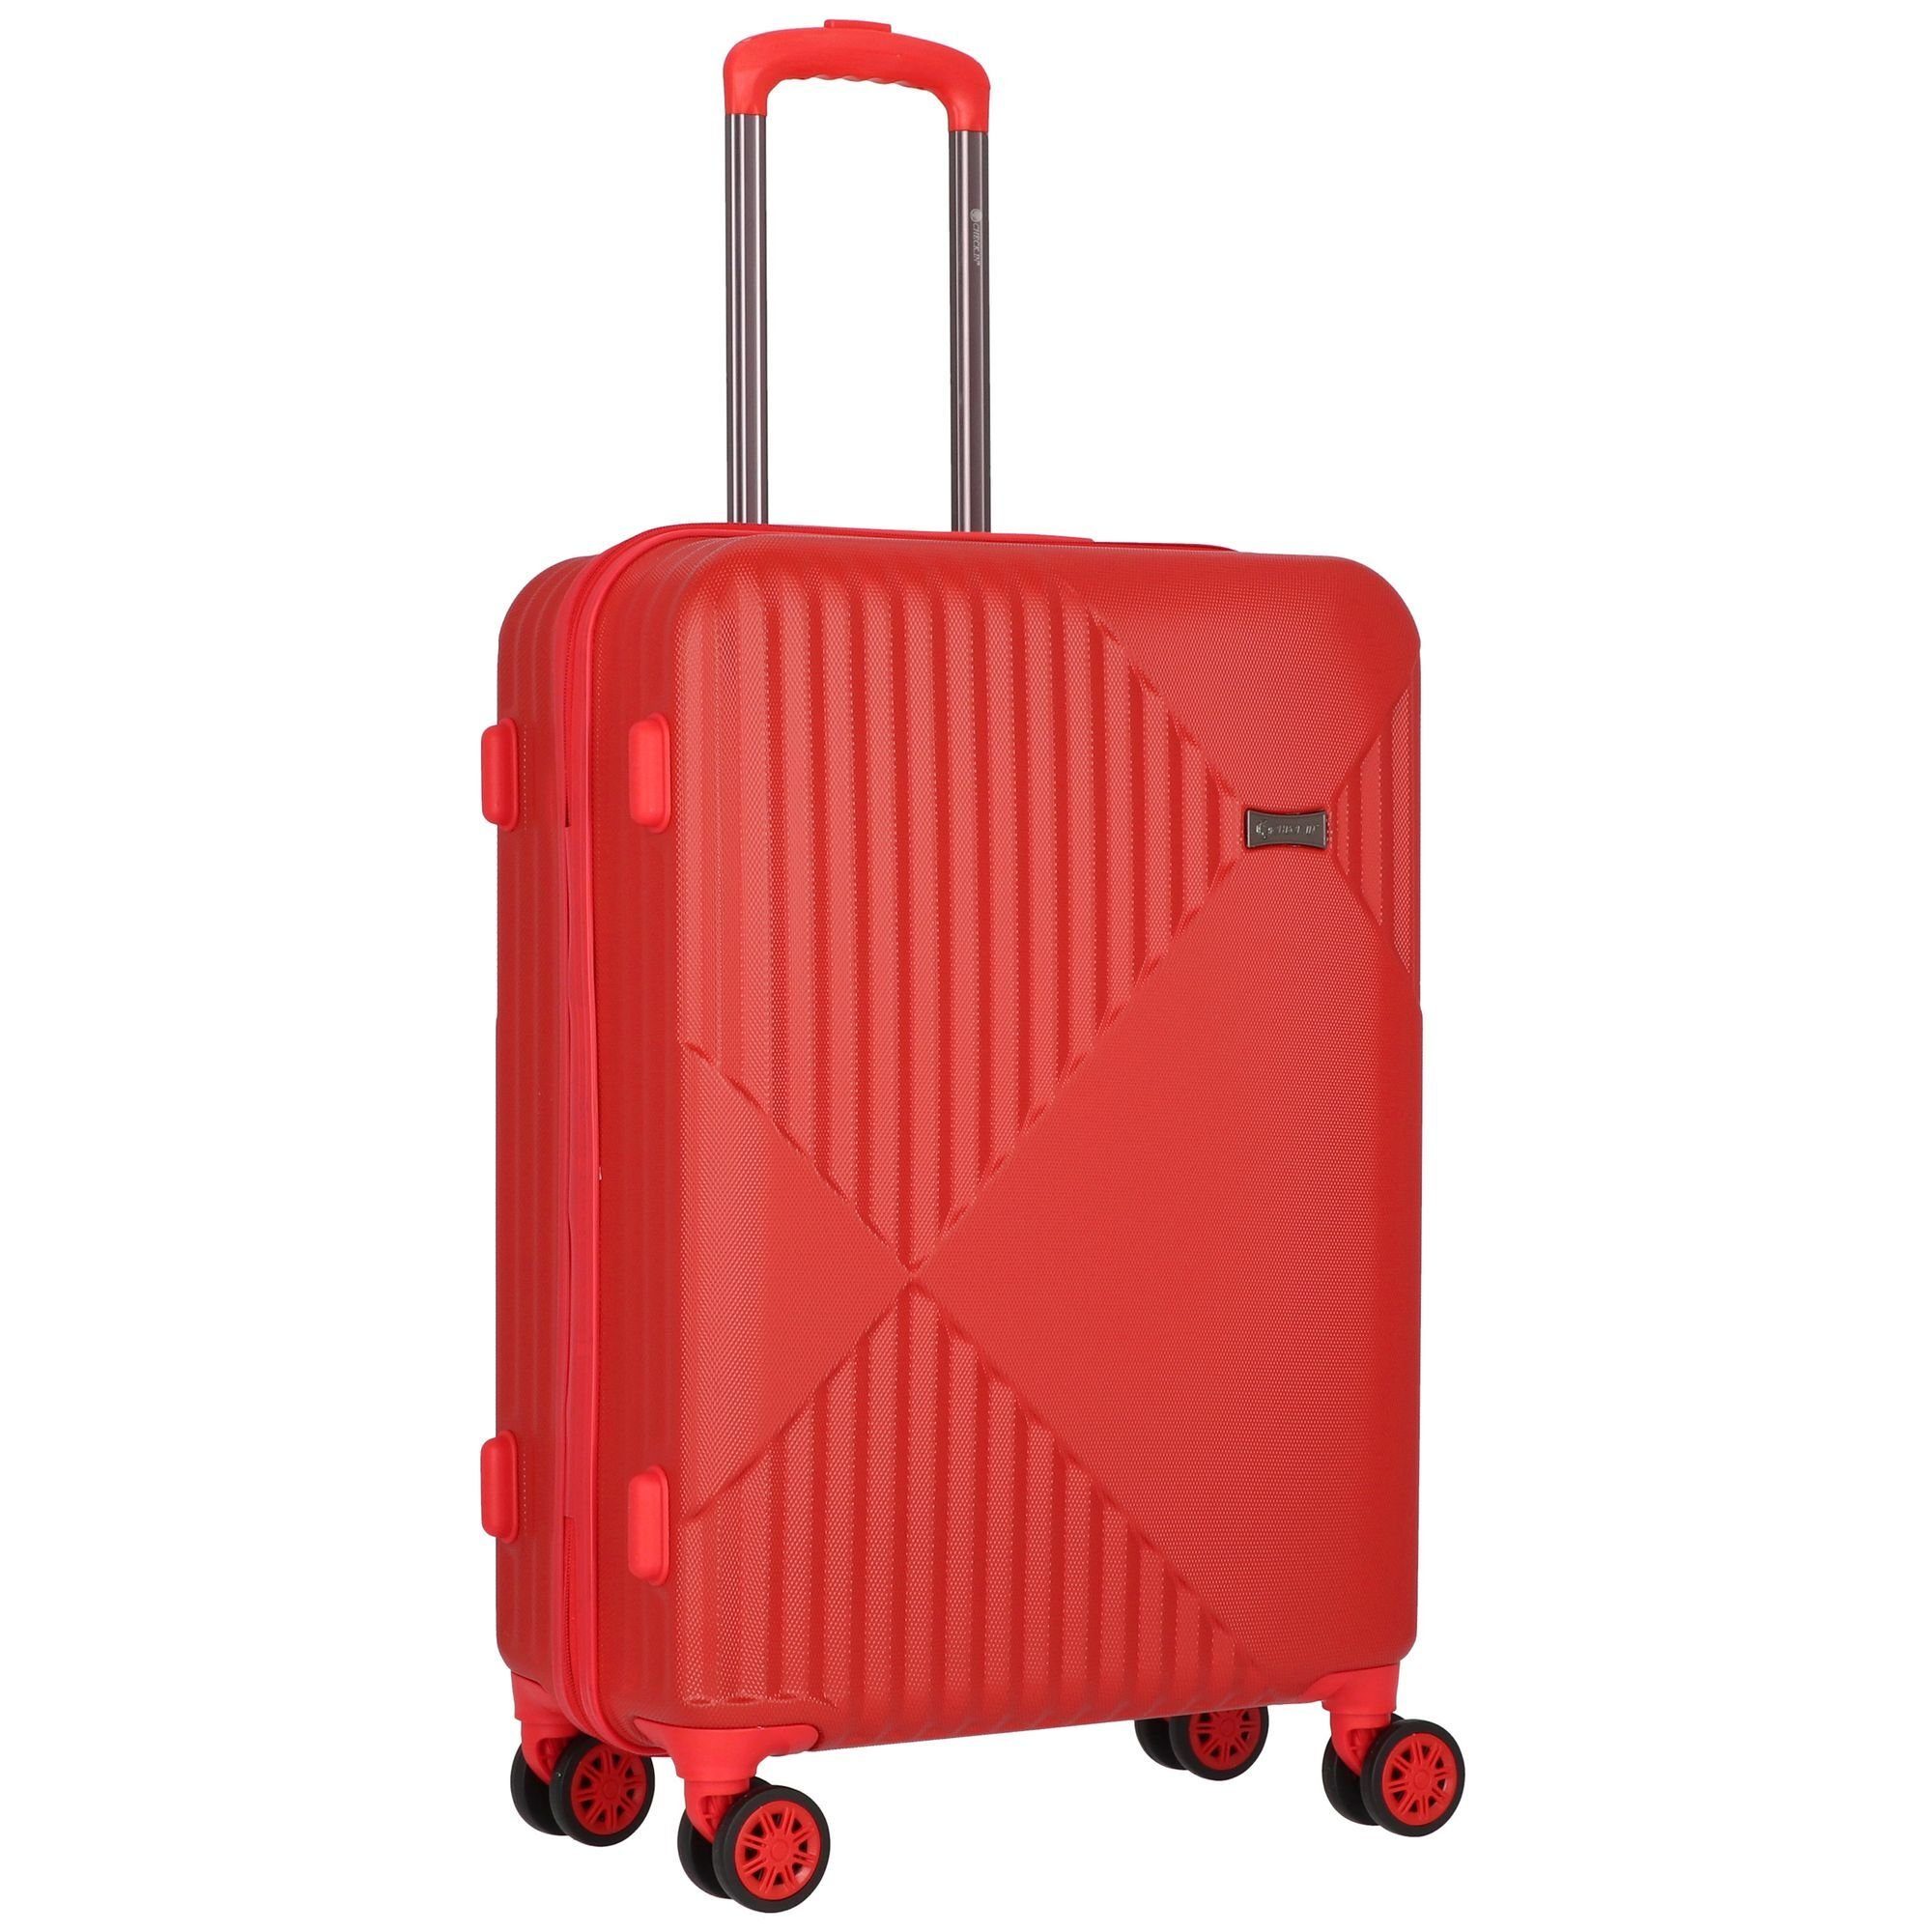 CHECK.IN® Trolleyset Liverpool, 4 3 Rollen, tlg), rot (3-teilig, ABS